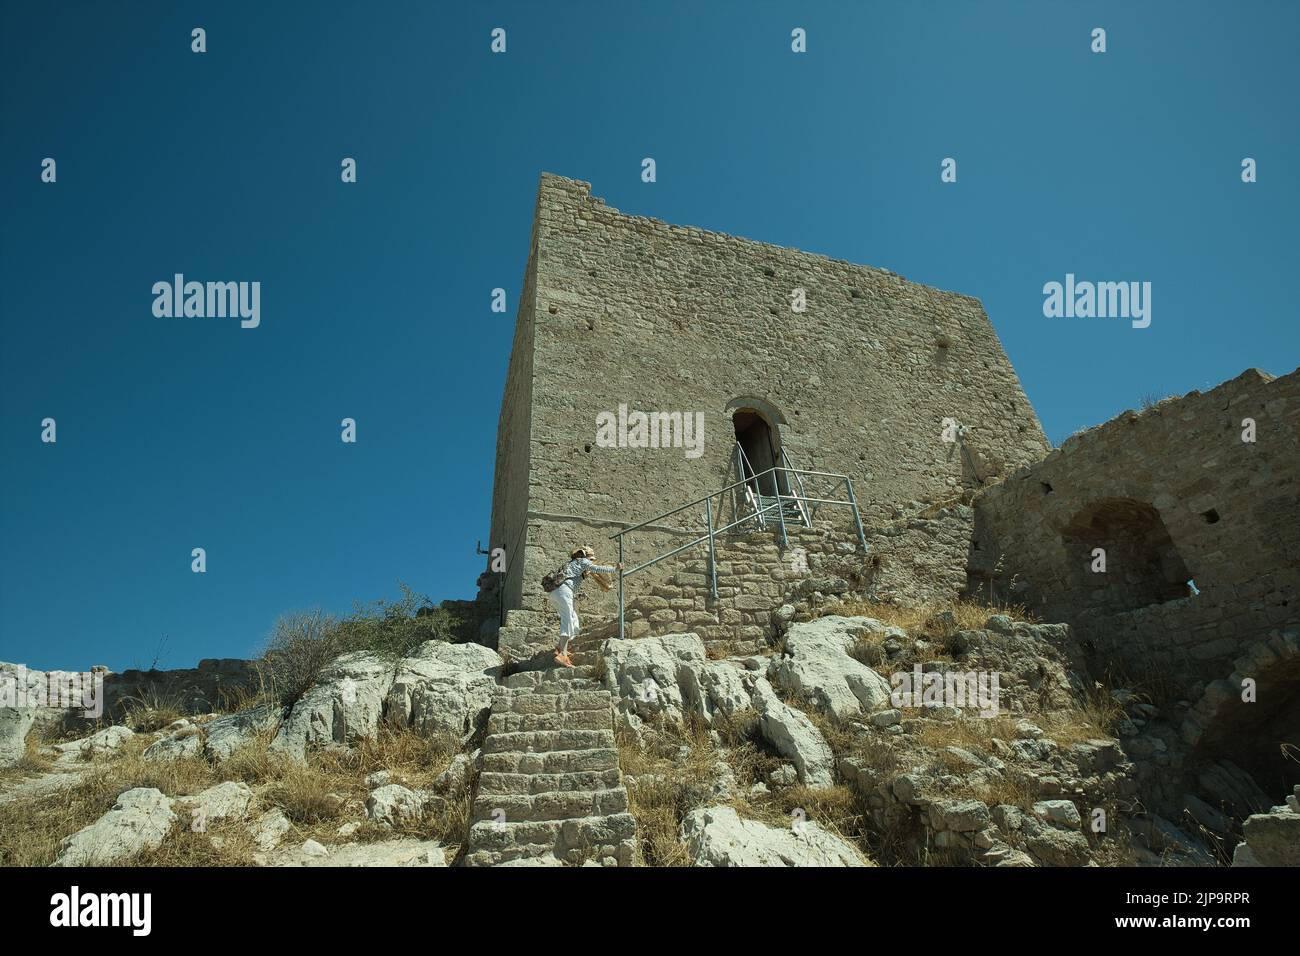 Female tourist entering the Frankish tower in the Acrocorinth site in Corinth, Greece in summer Stock Photo